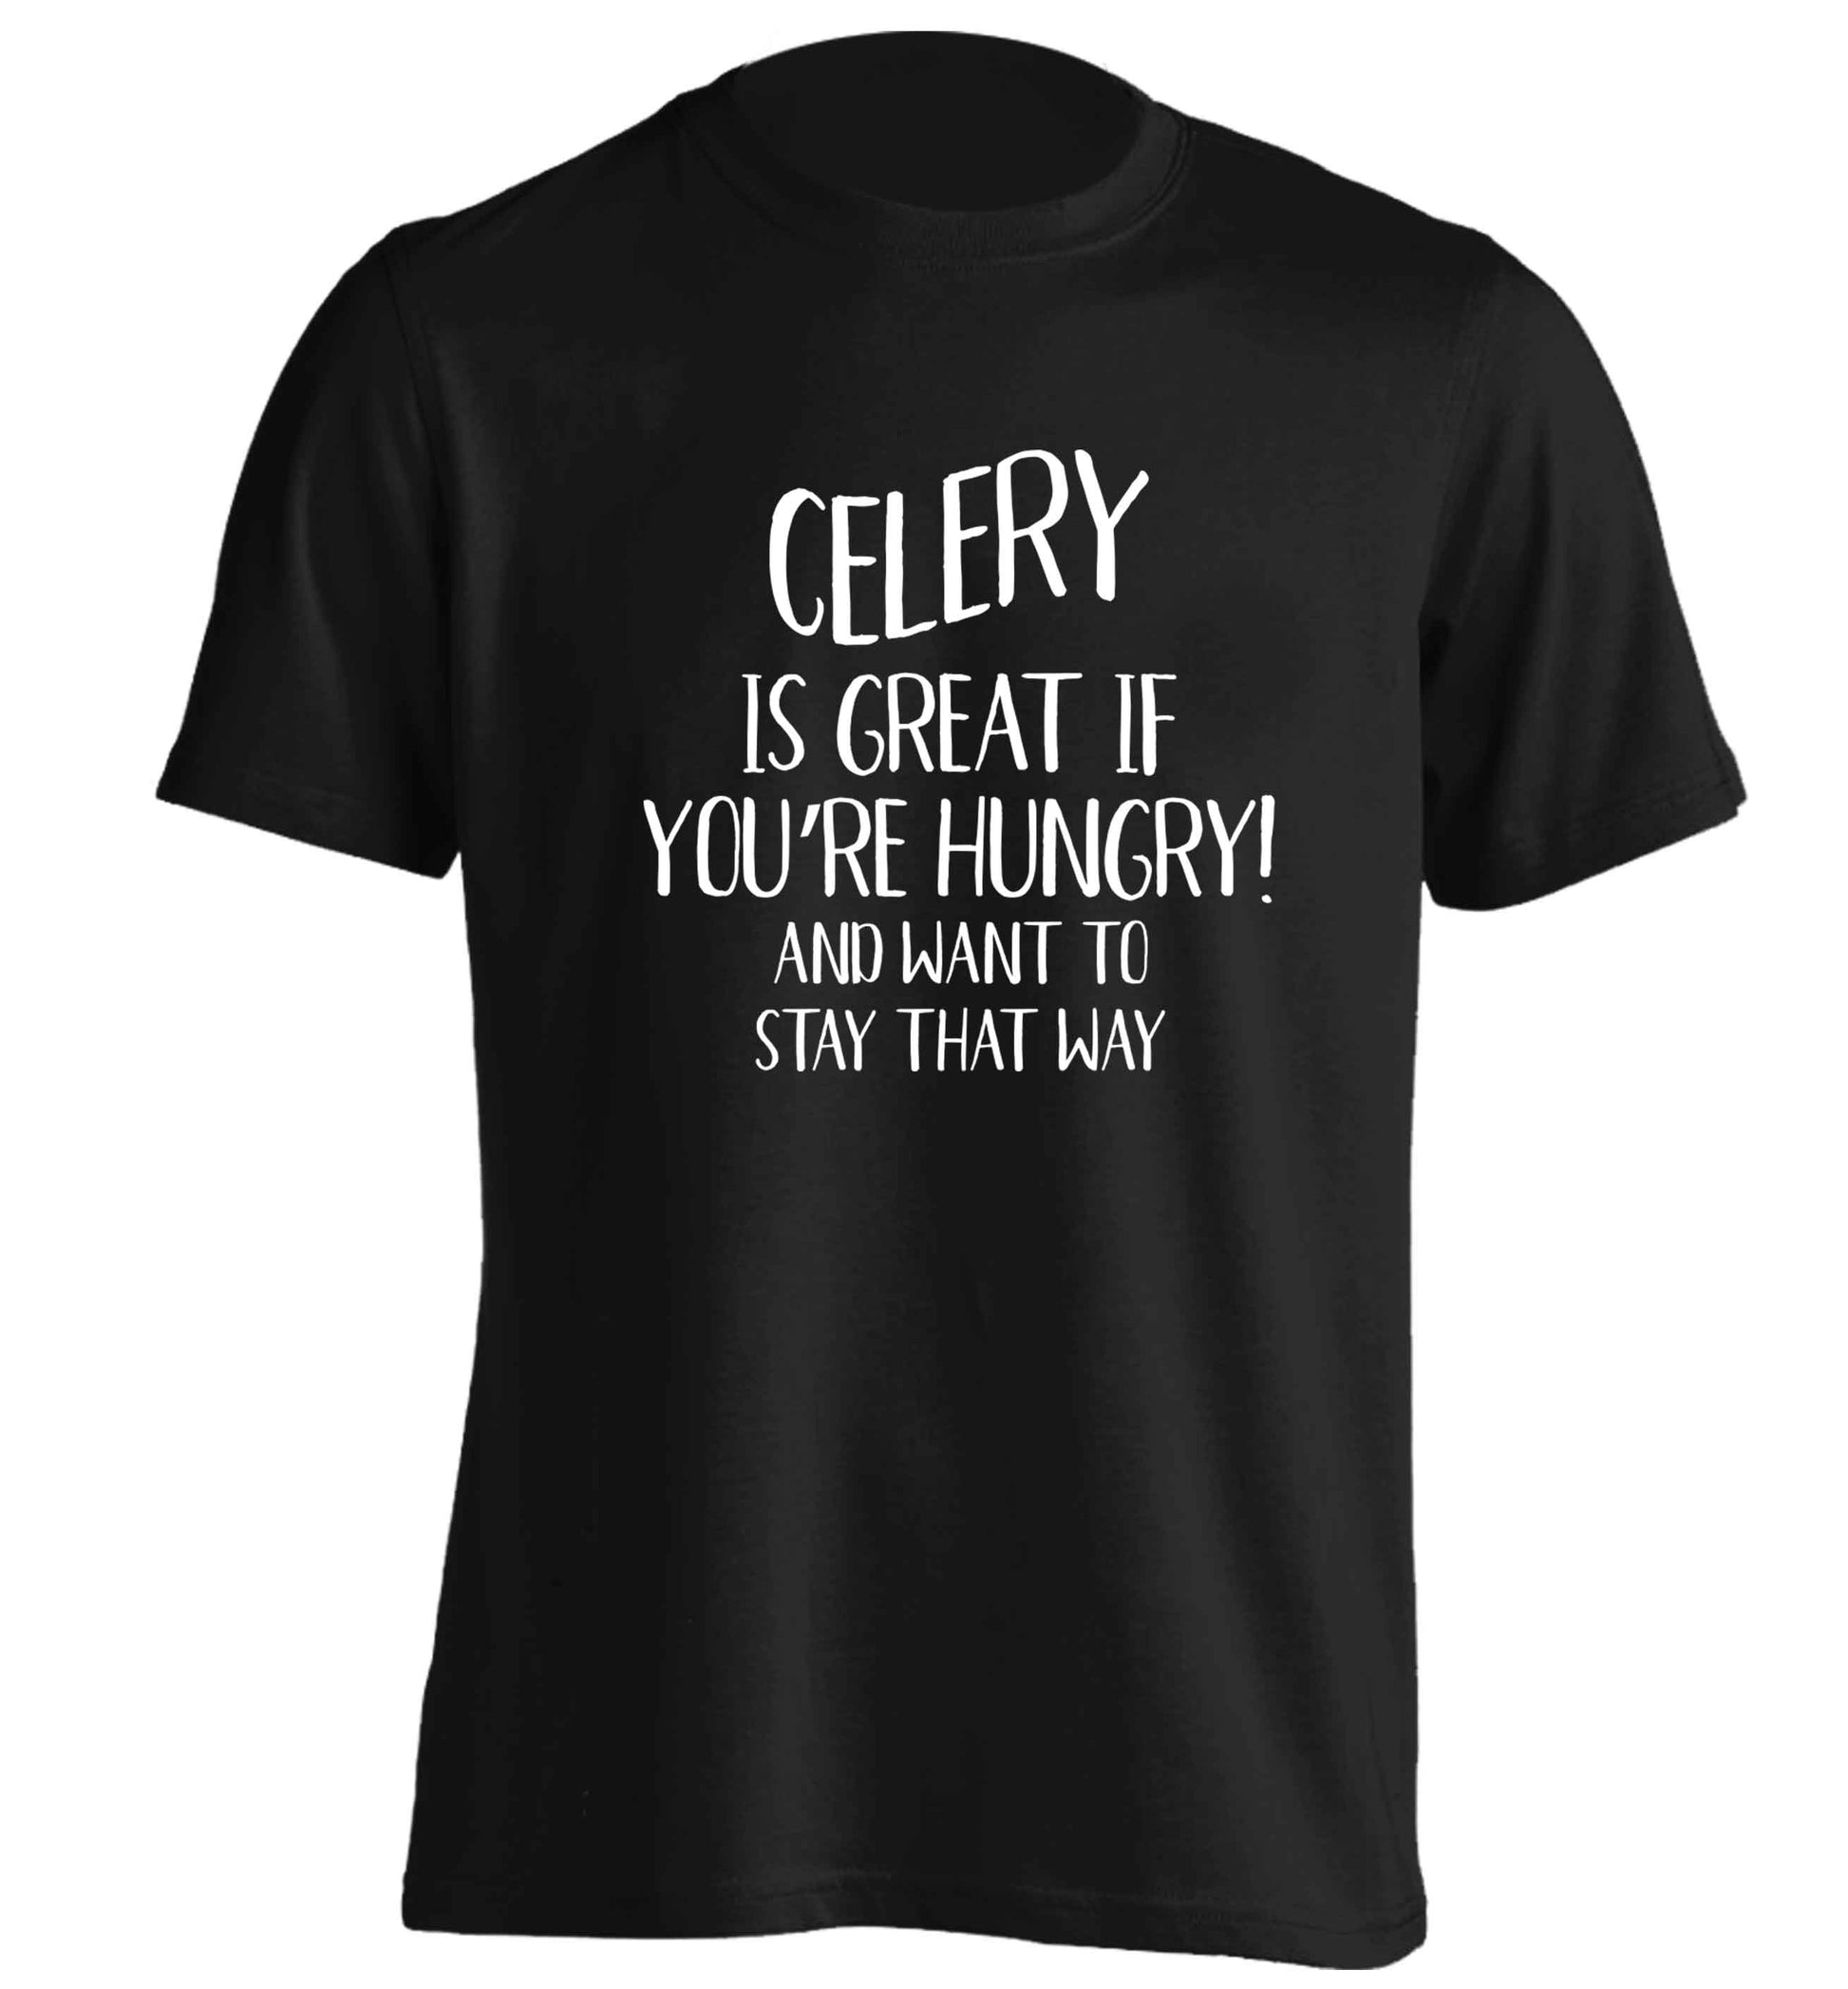 Cellery is great when you're hungry and want to stay that way adults unisex black Tshirt 2XL